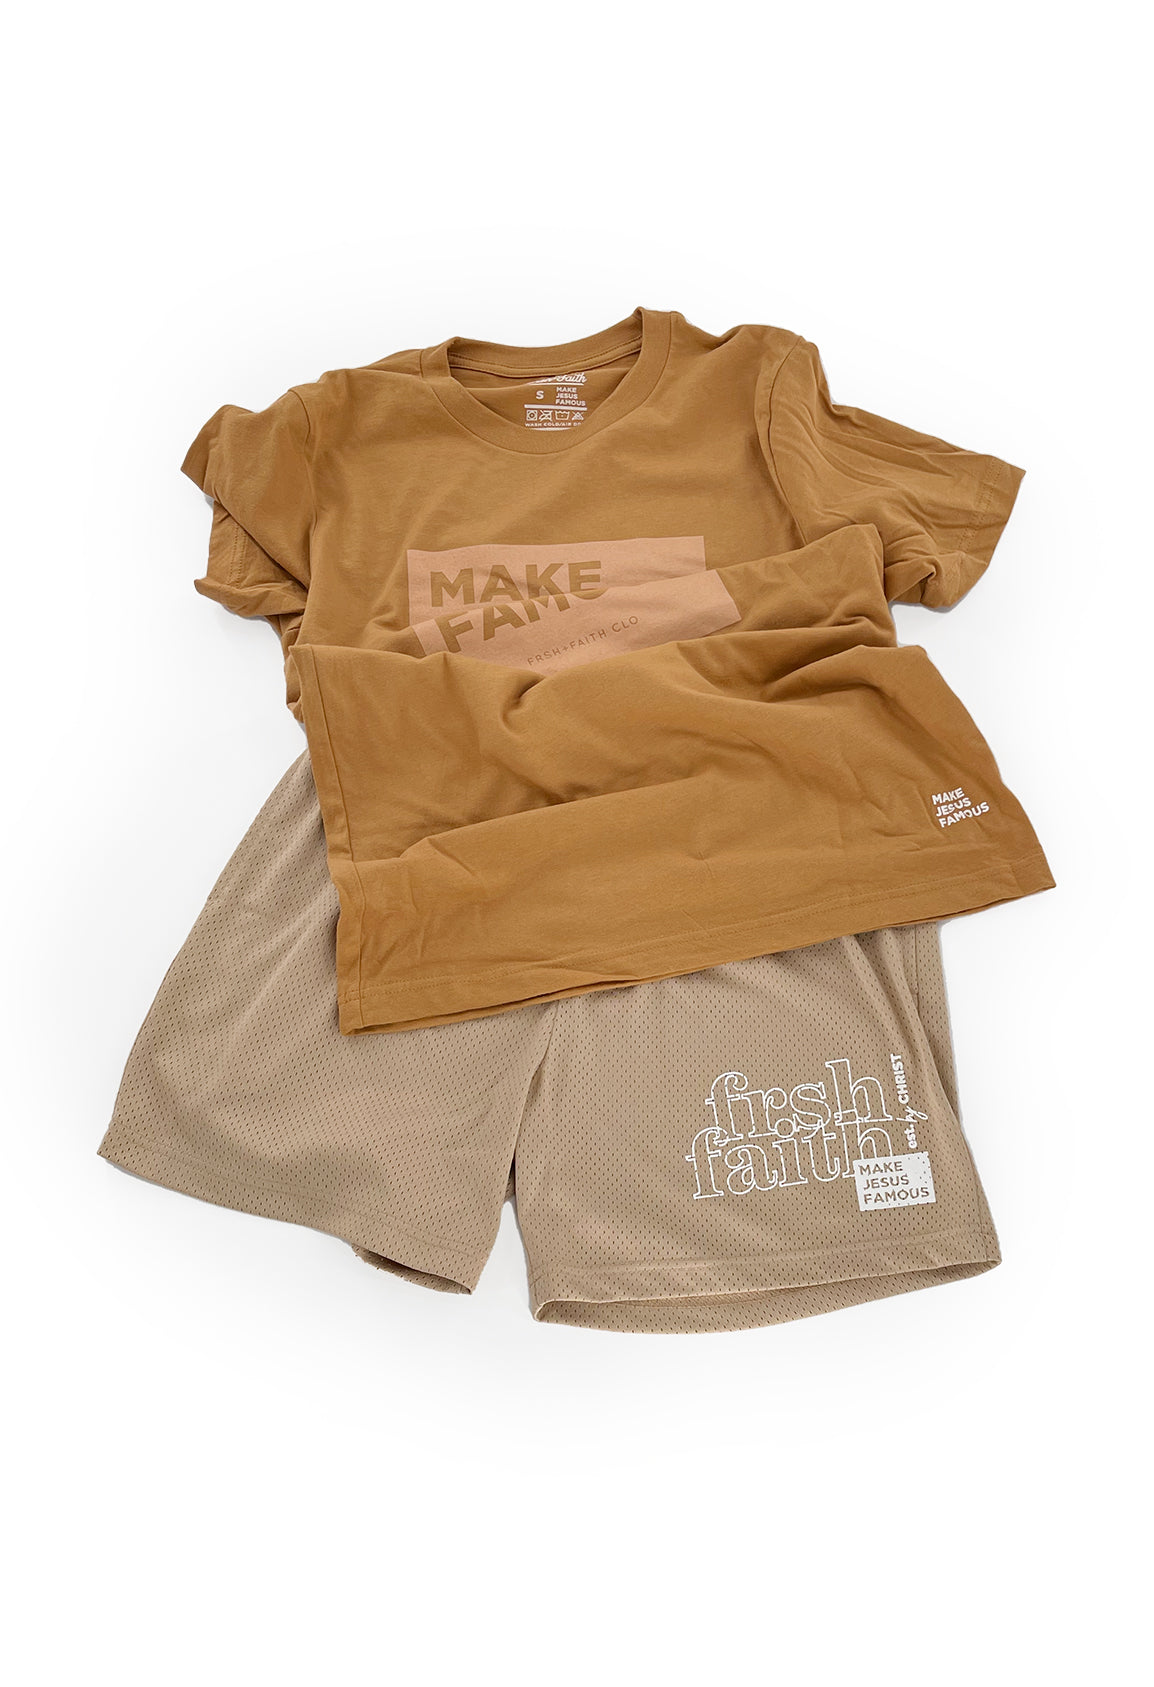 A FrshFaith Make Jesus Famous Toast & Terracotta tee, with mesh shorts 👌🏾. ❤️✝️🕊